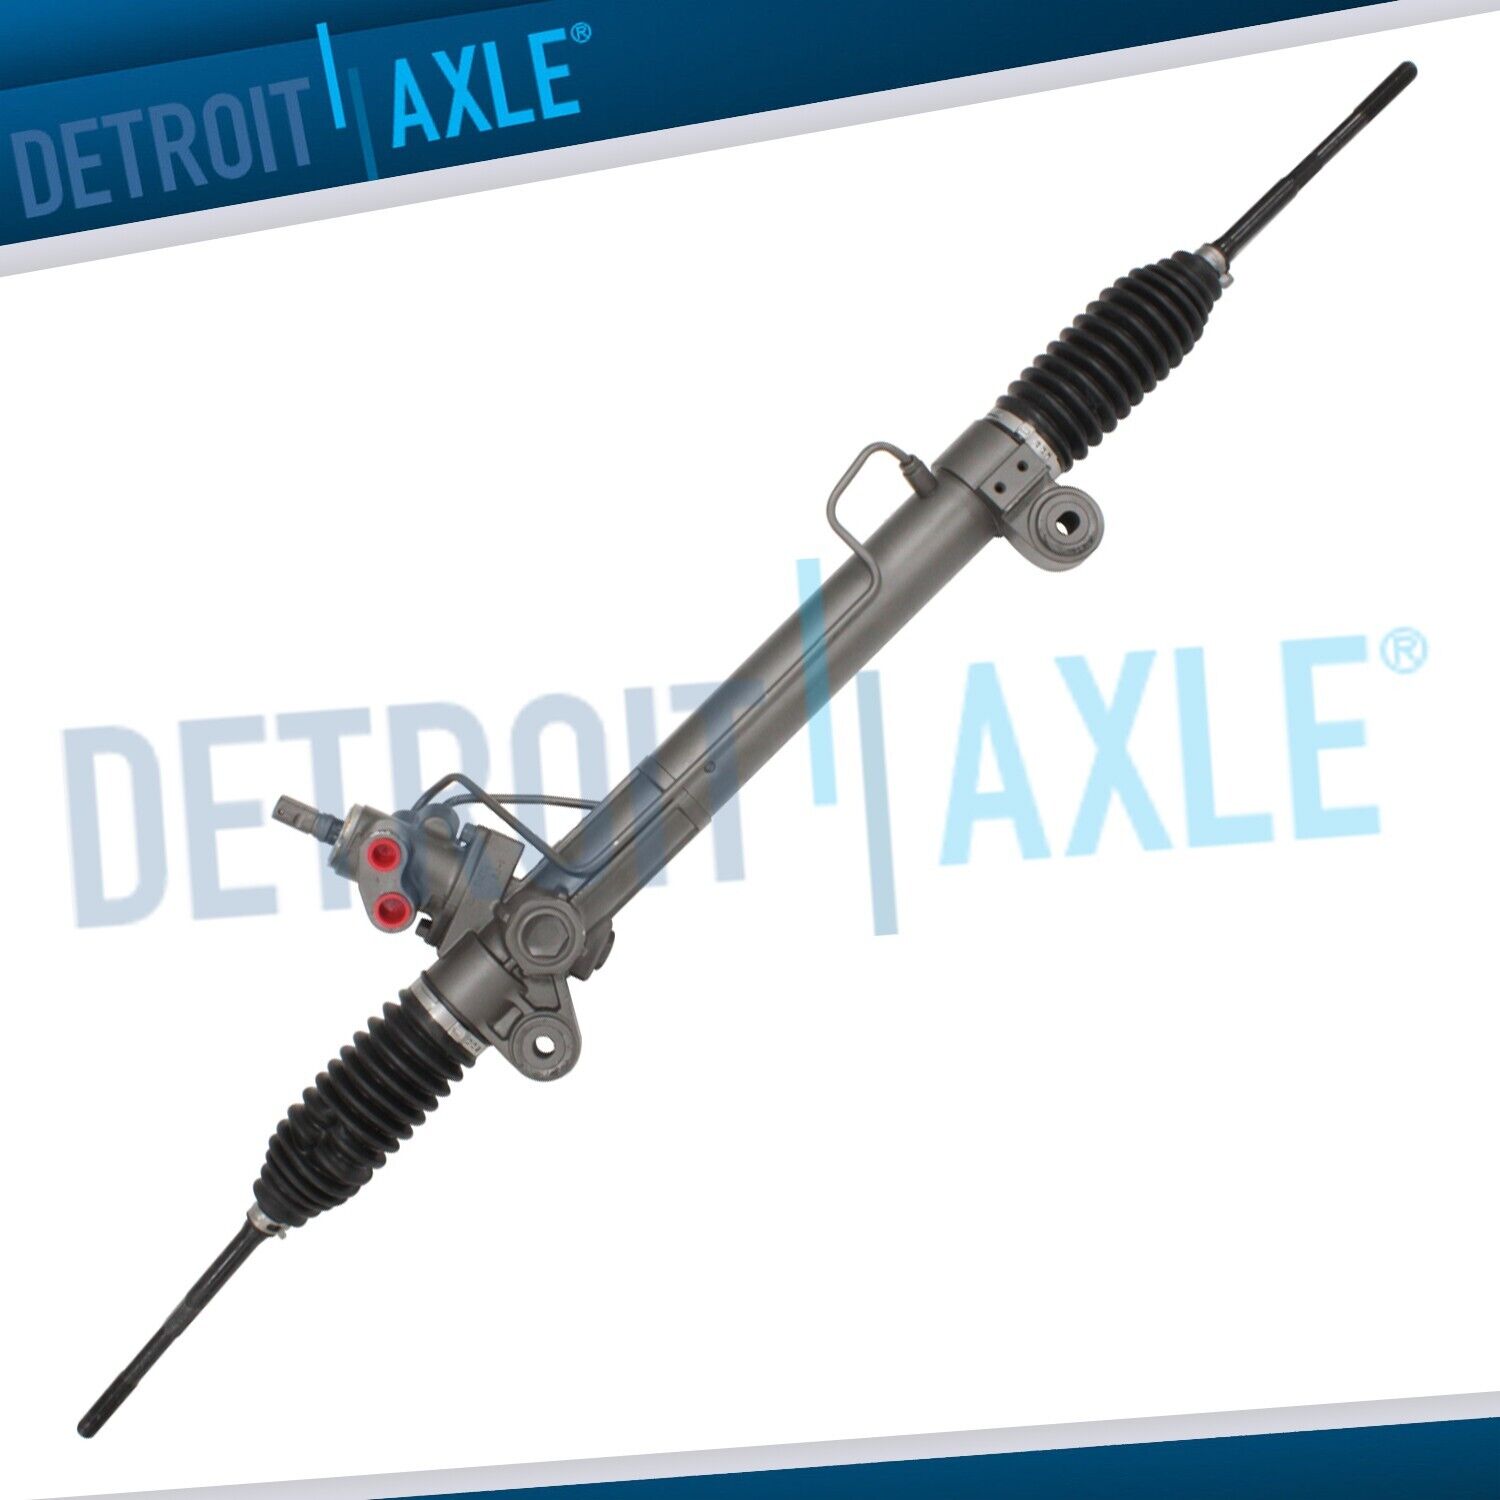 Complete Power Steering Rack and Pinion for Chevy Equinox Saturn Vue Torrent